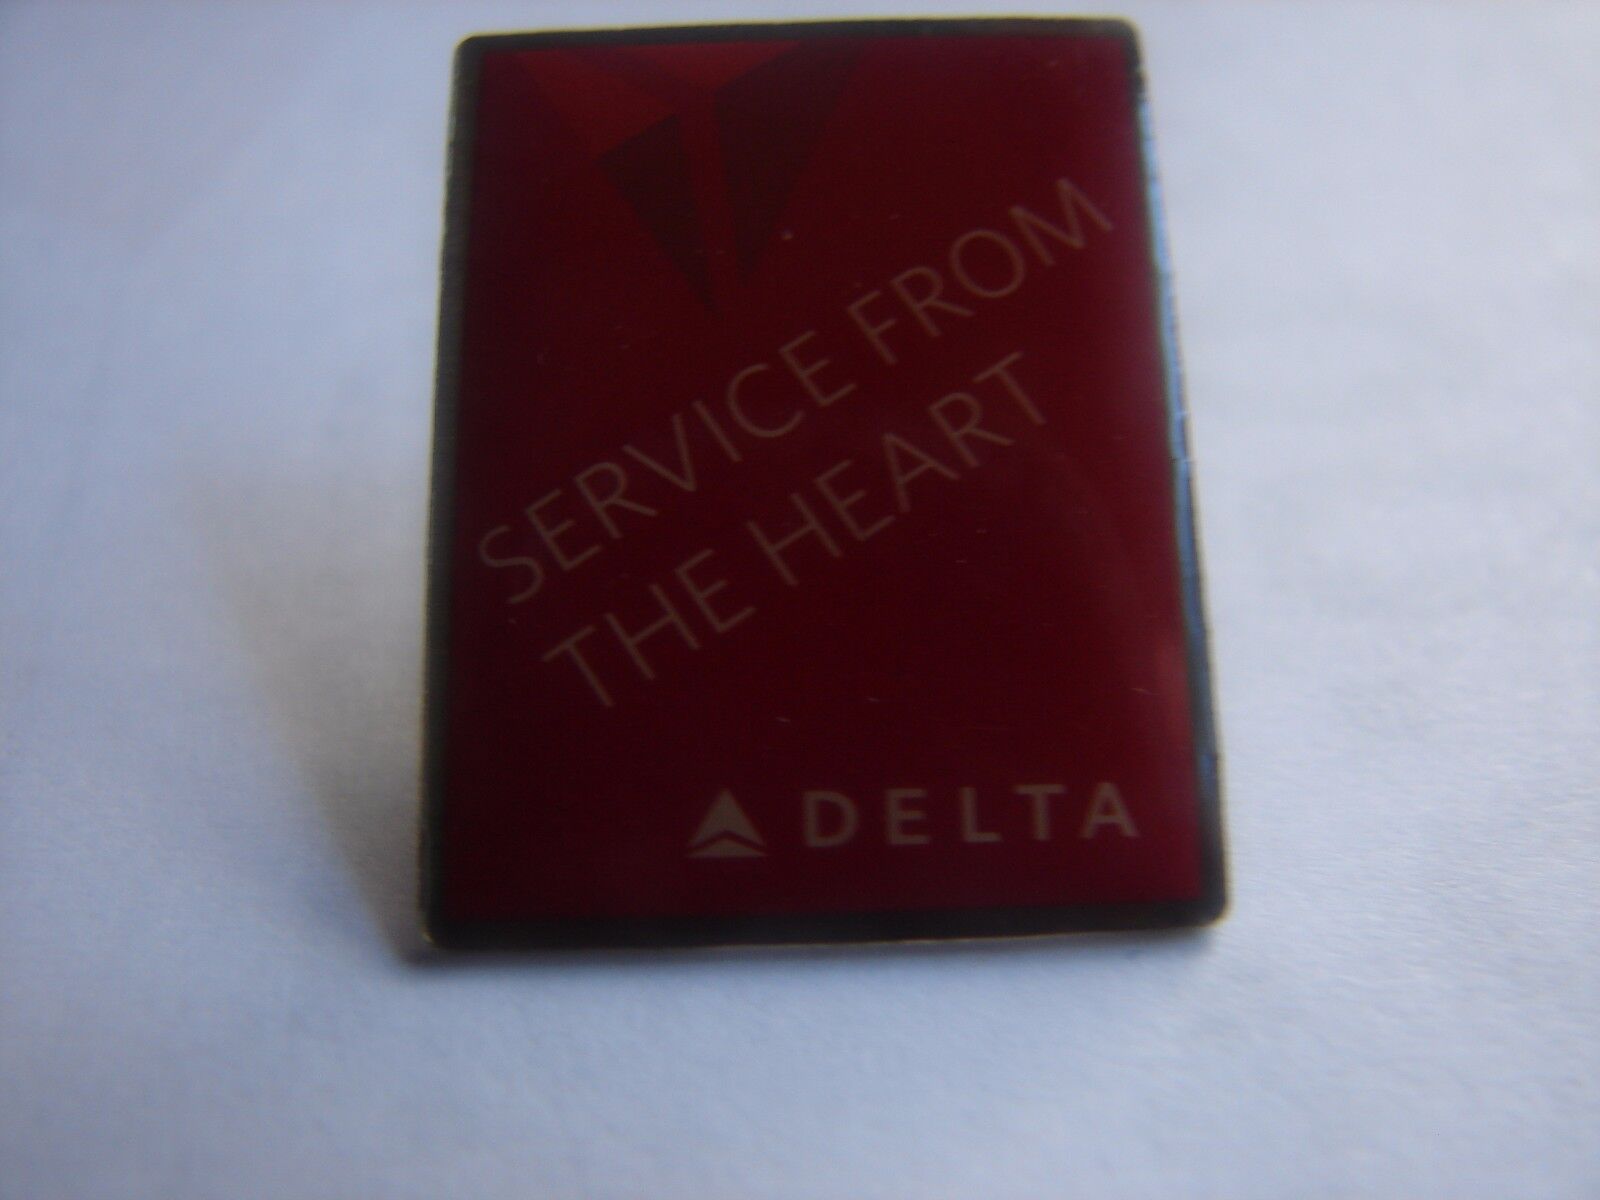 DELTA AIR LINES - SERVICE FROM THE HEART - PIN  